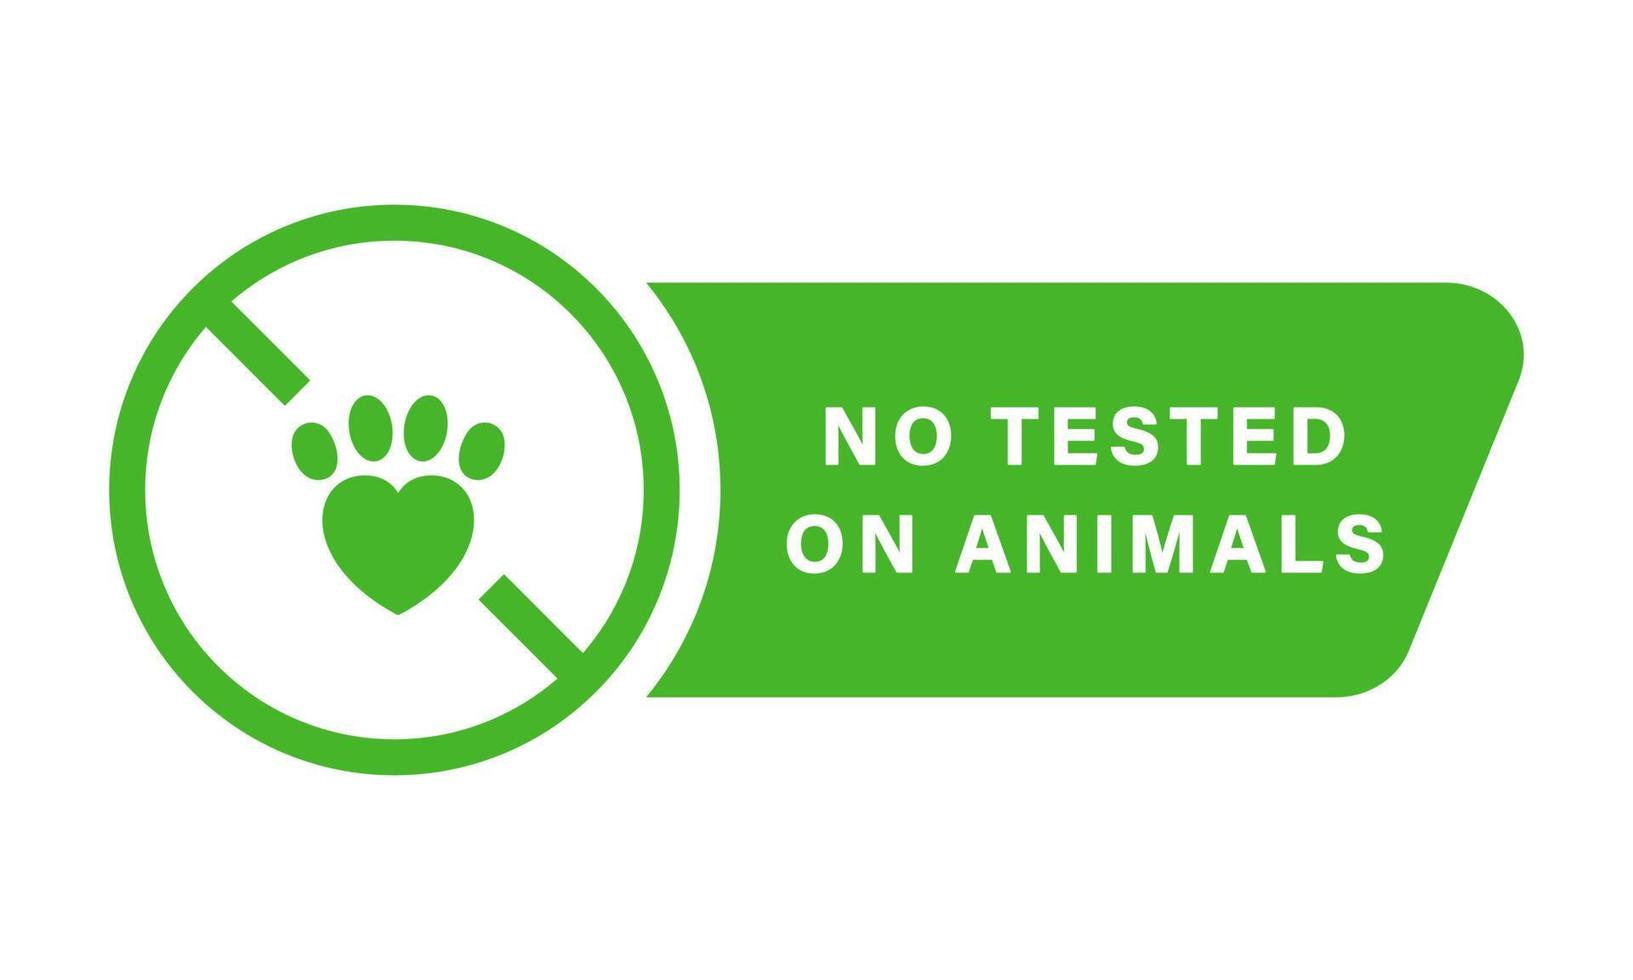 Paw Footprint in Heart Not Animal Testing Silhouette Icon. No Tested on Animals in Laboratory, Cruelty Free Green Stamp. Ingredient Not Trialed on Animals Imprint Sign. Isolated Vector Illustration.